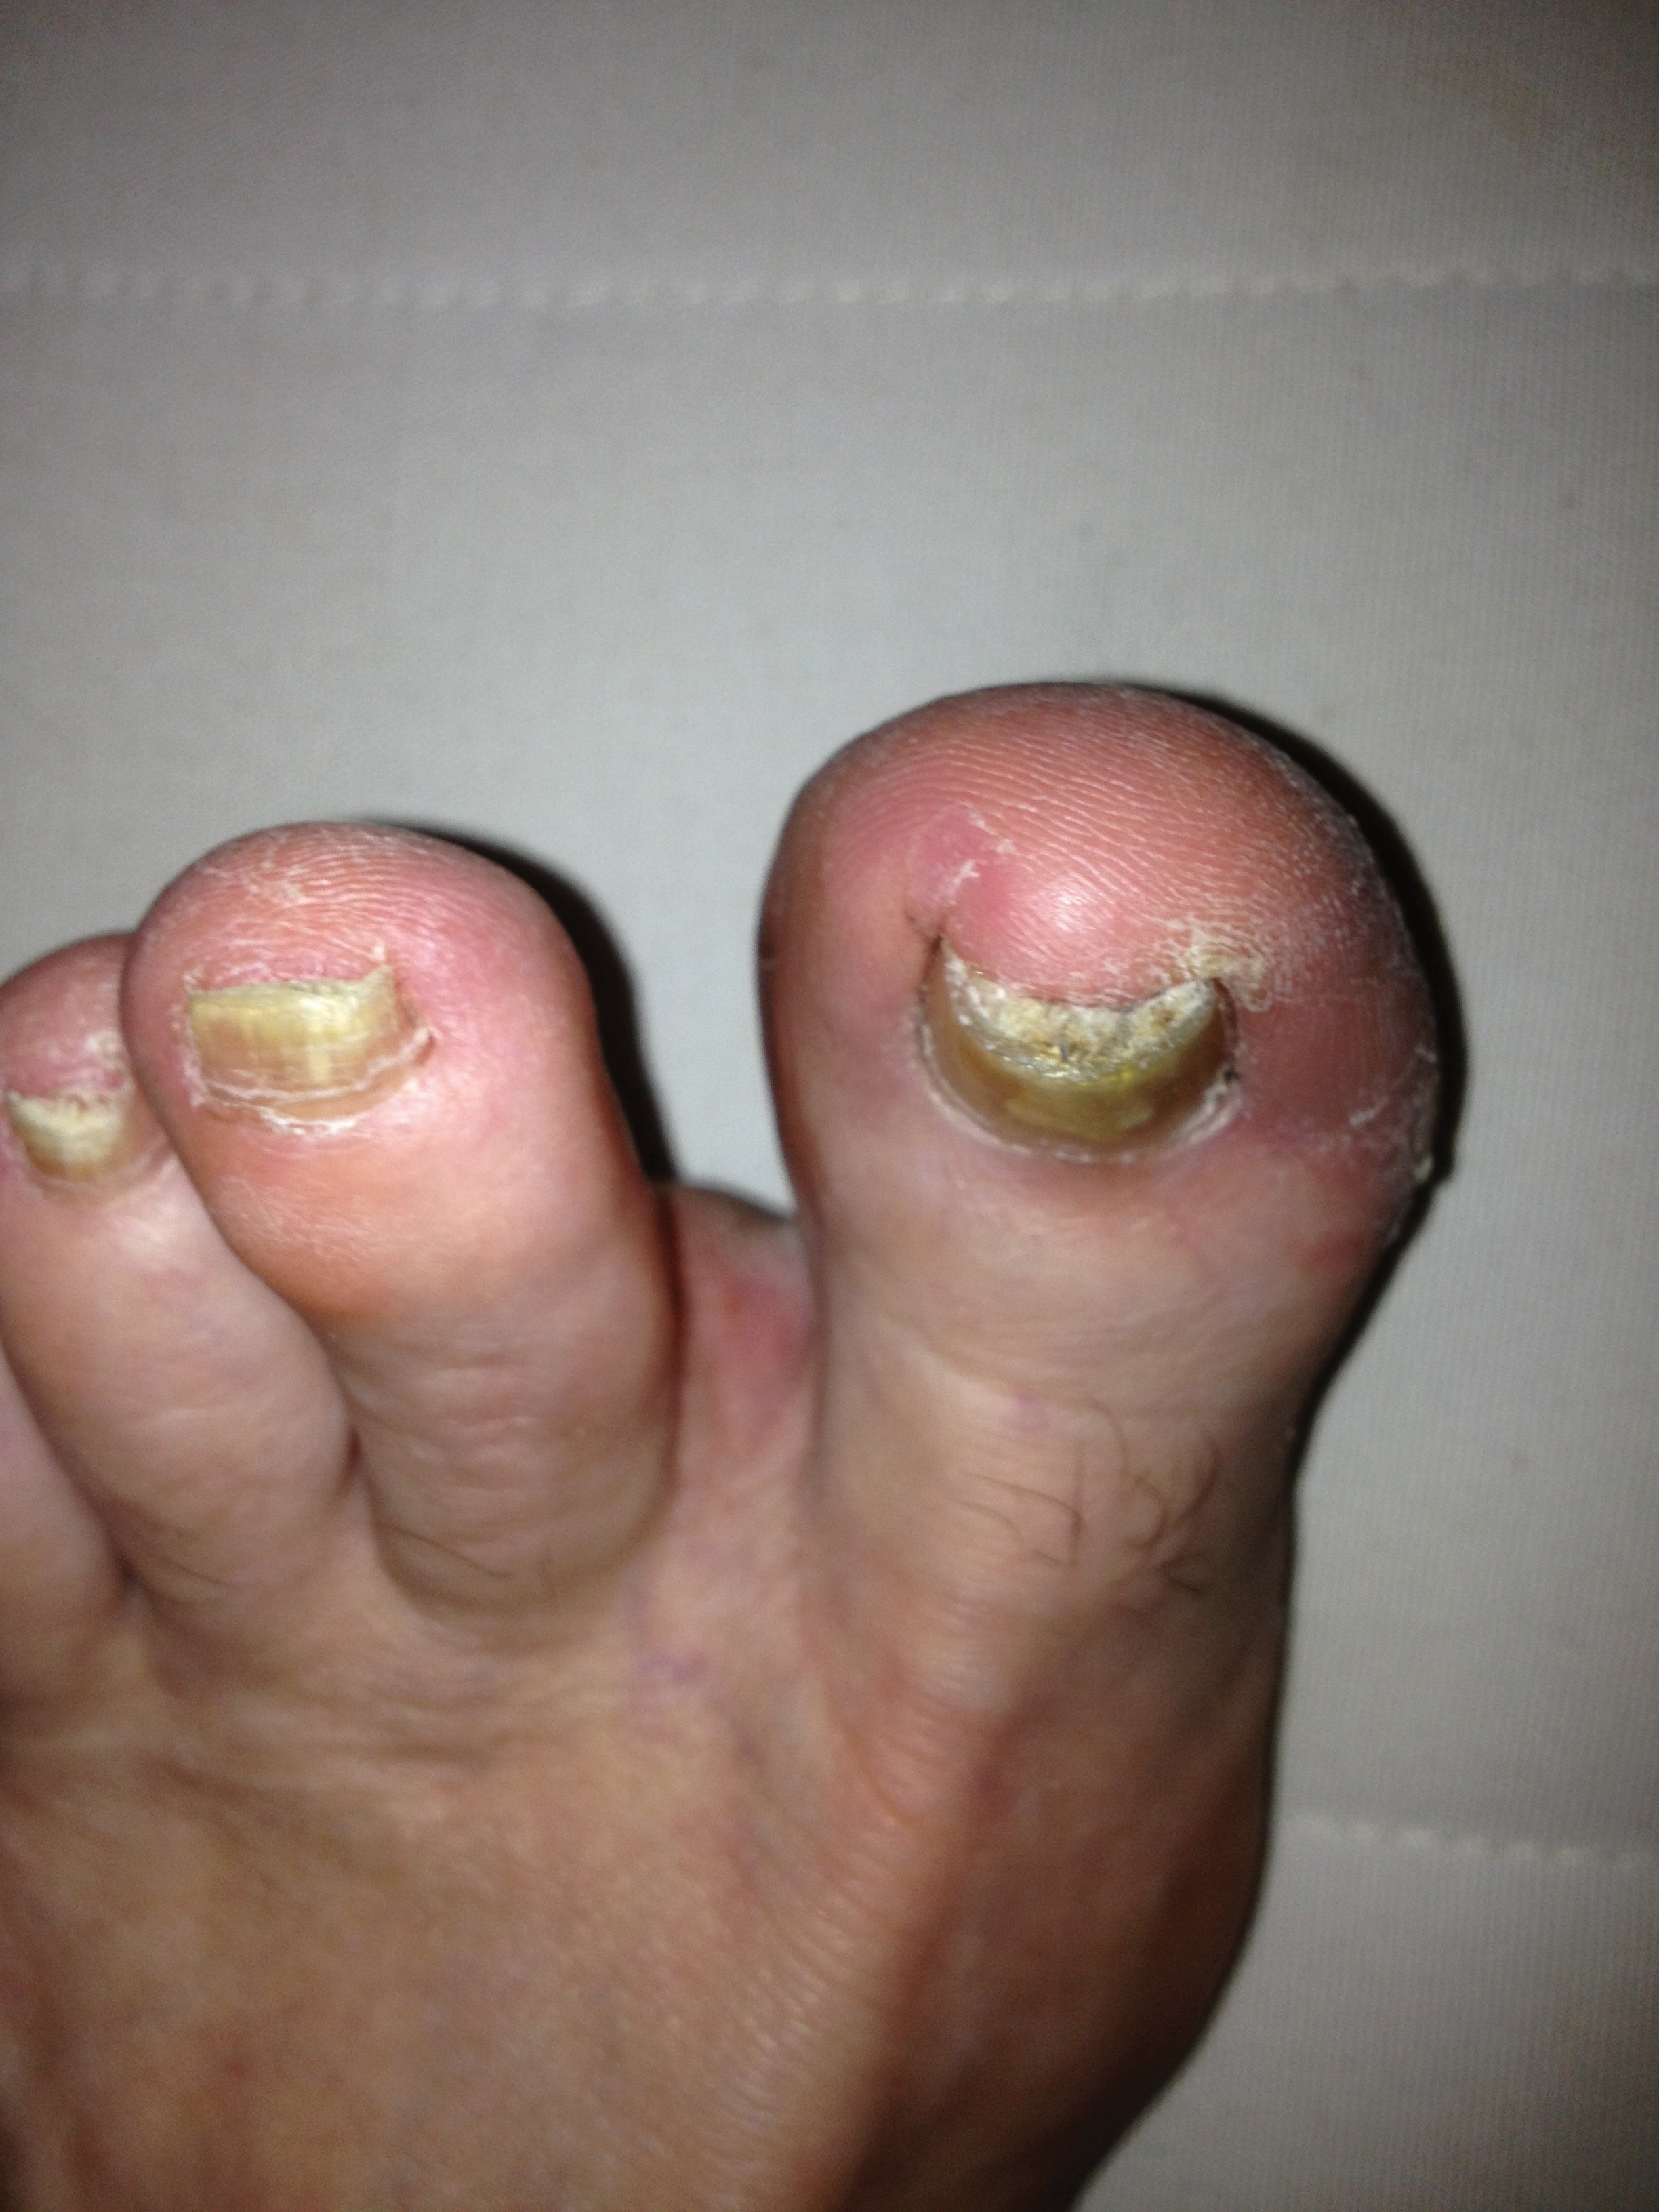 Curled Toe Nails? All About Pincer Nails and Ingrown Toenails